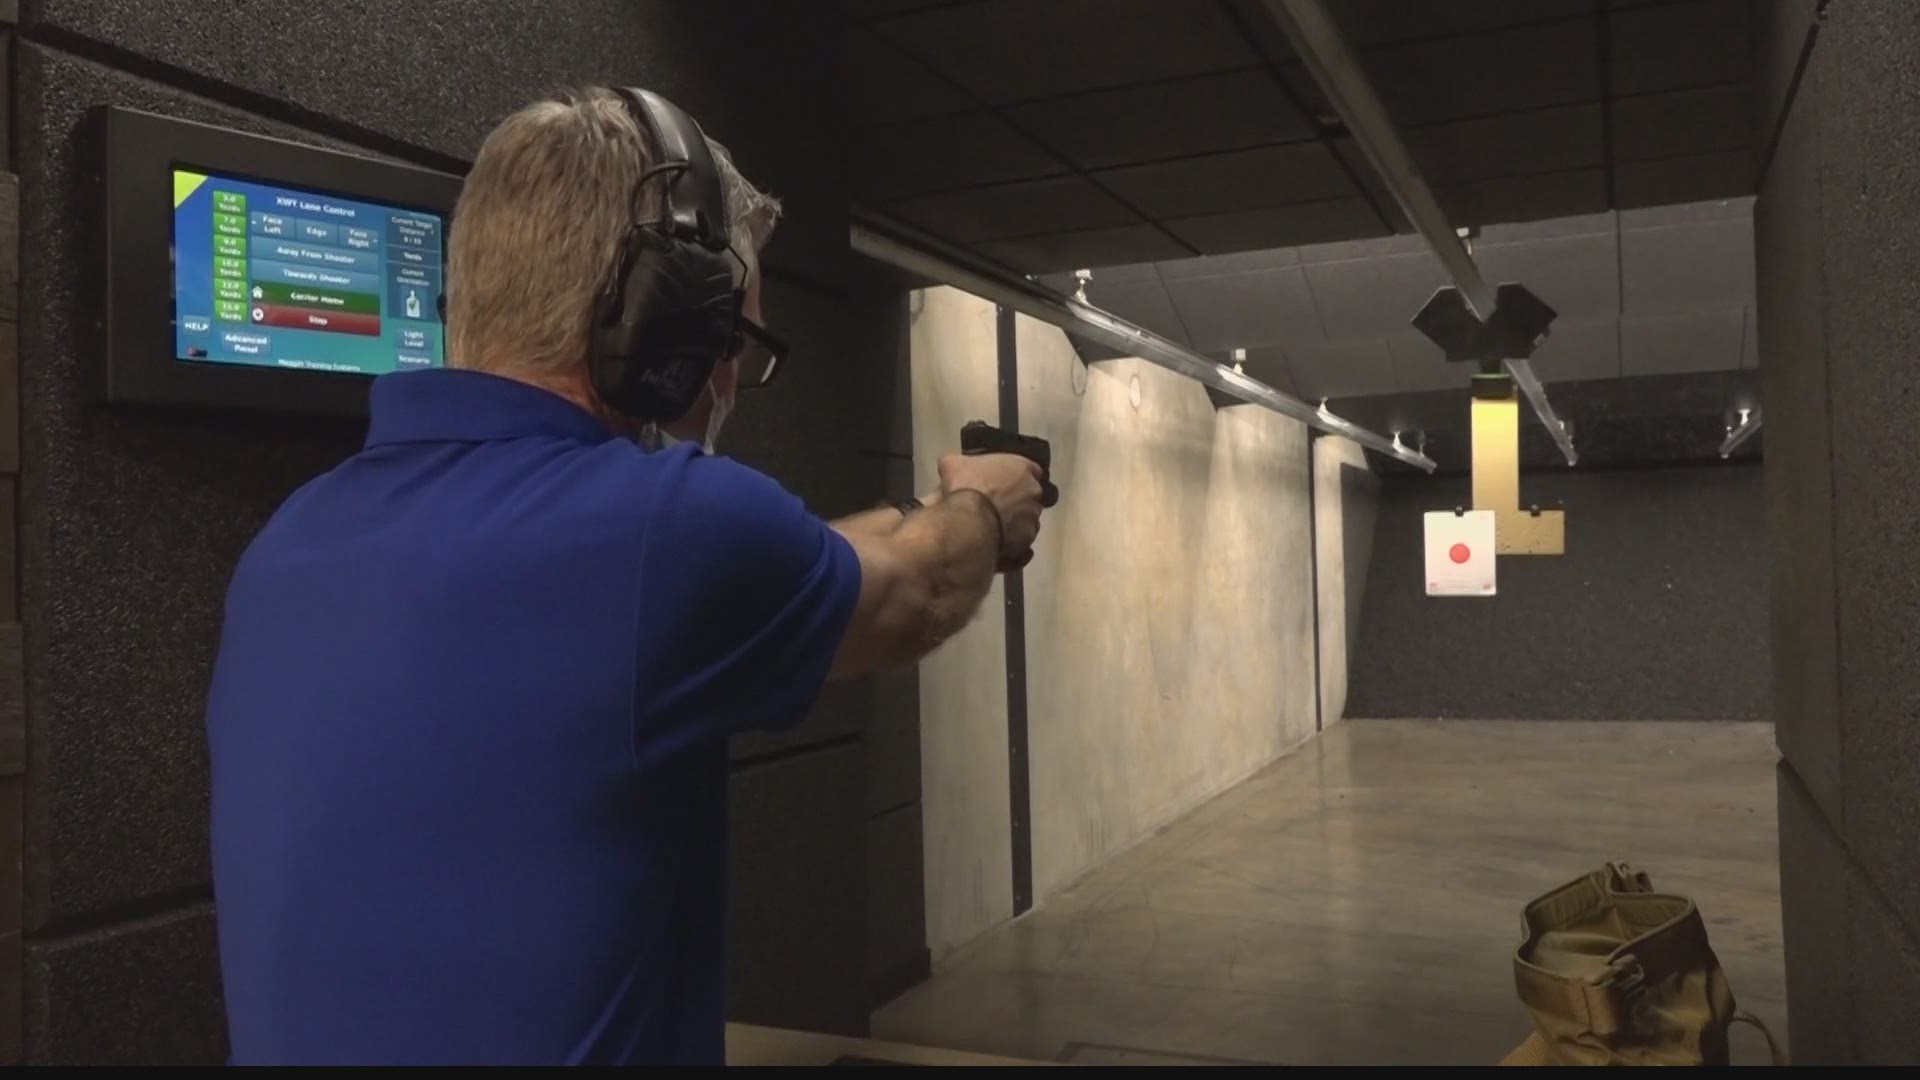 Supply of ammo may be down, but demand for firearm training is up rocketcitynow